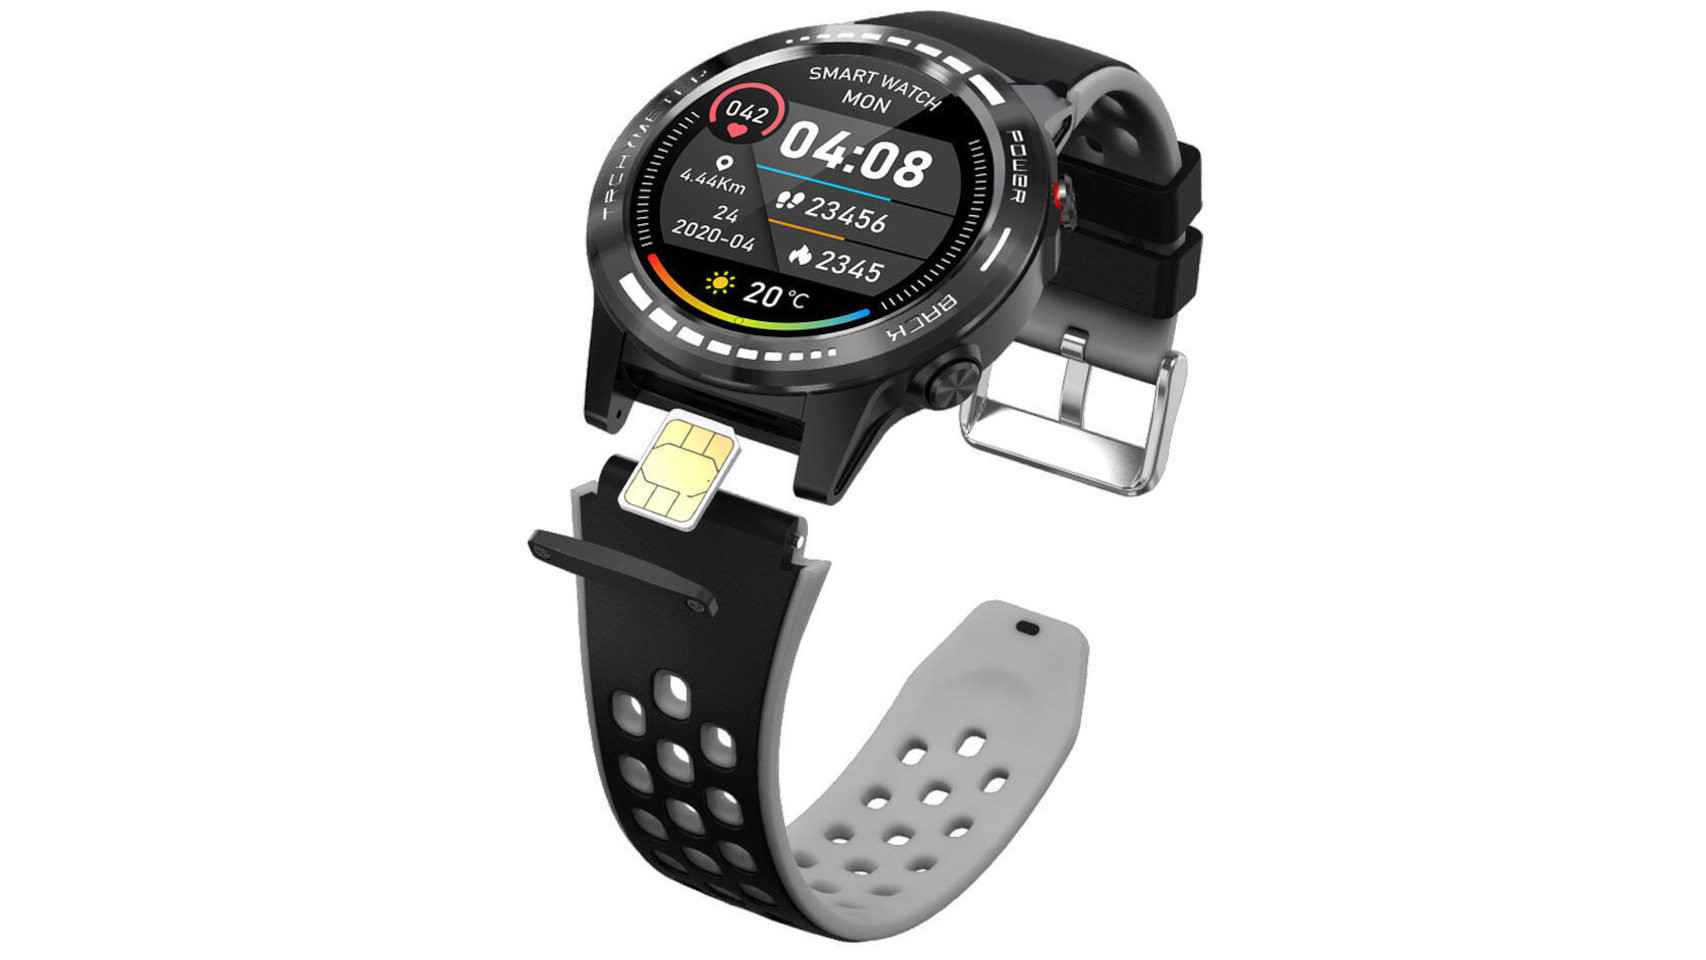 The Prixton watch  offered at Decathlon